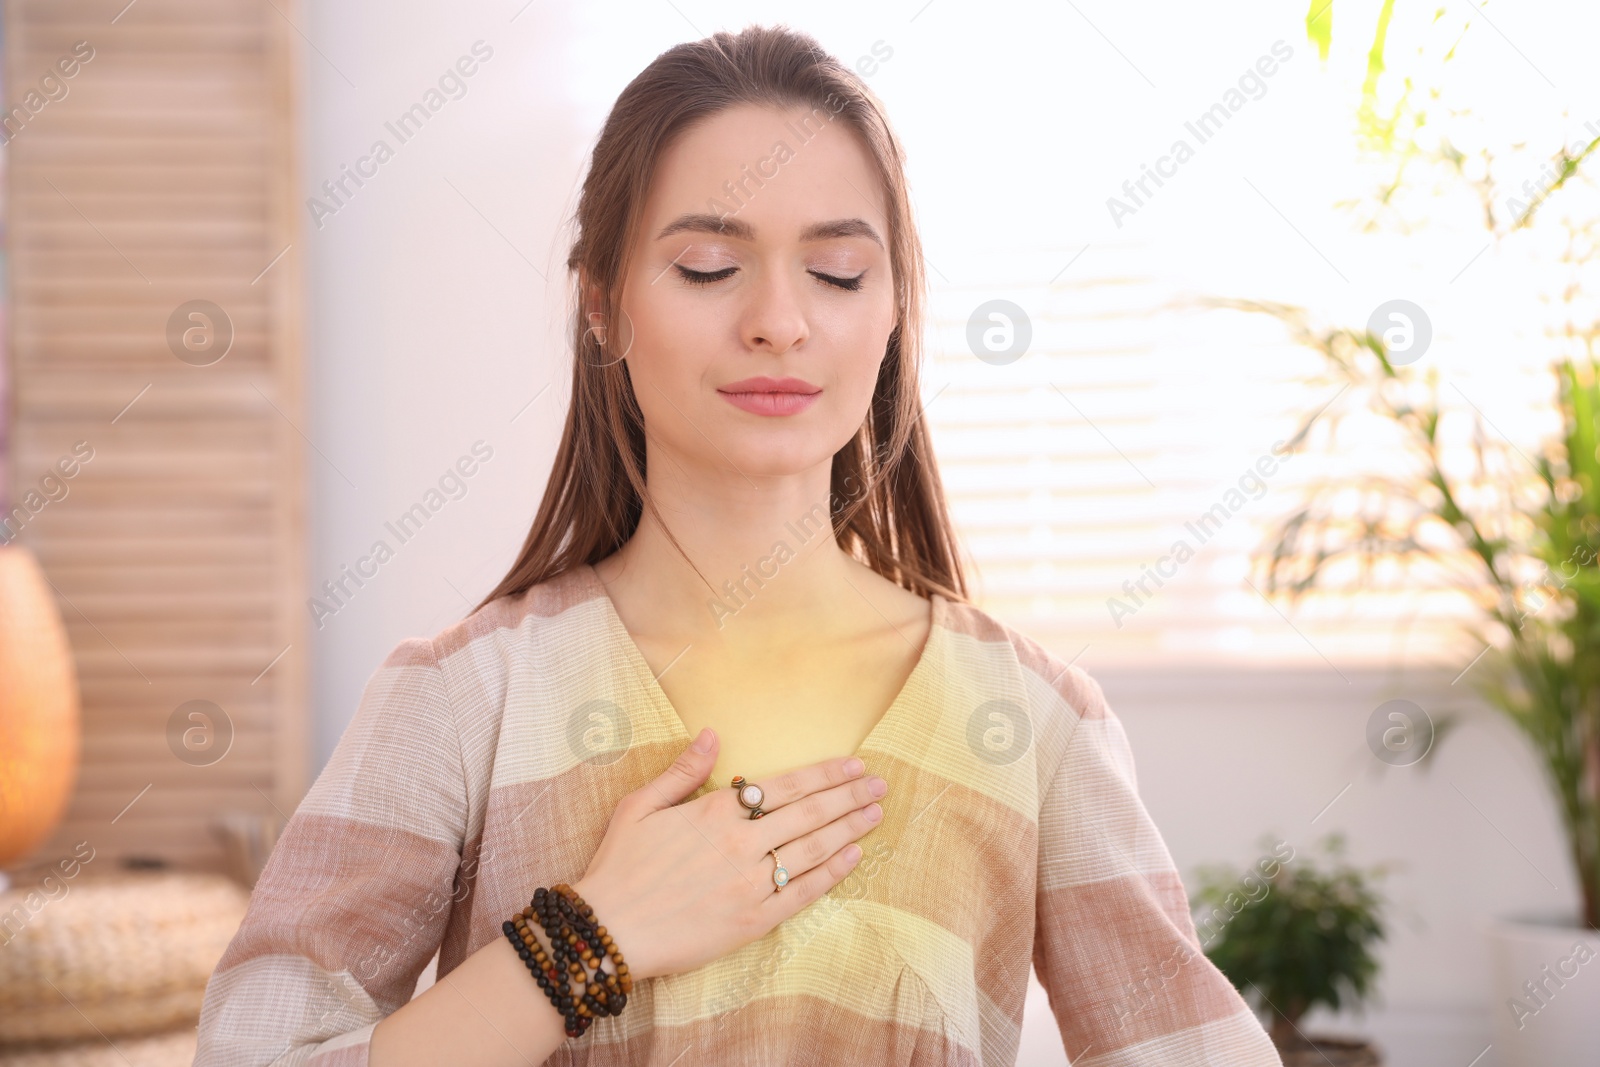 Photo of Young woman during self-healing session in therapy room